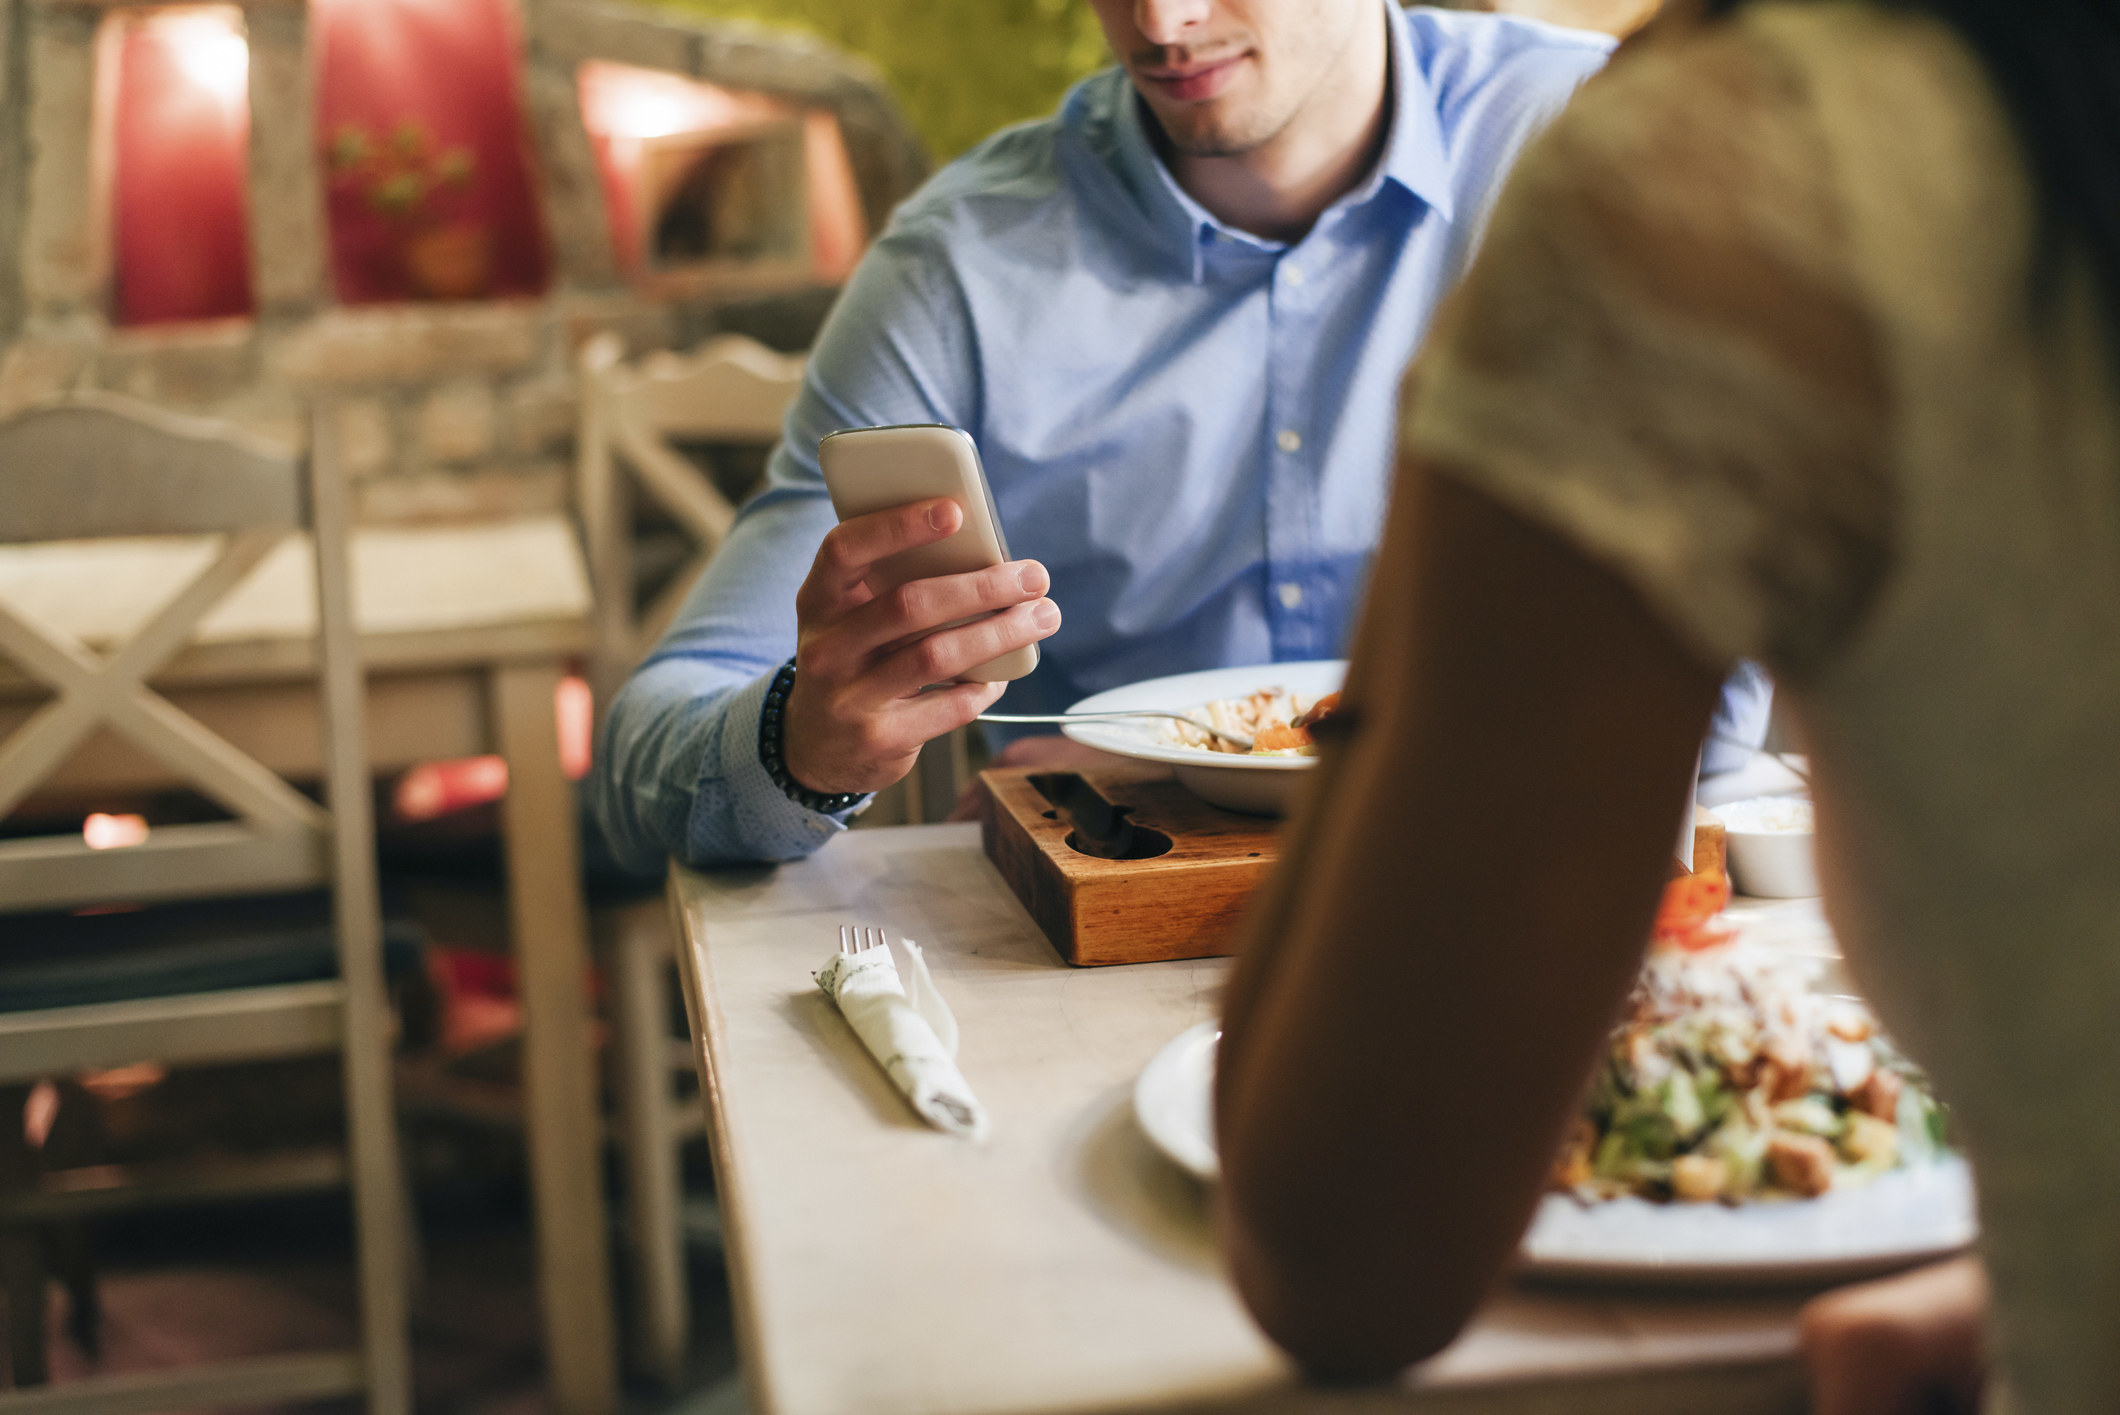 person on their phone during dinner